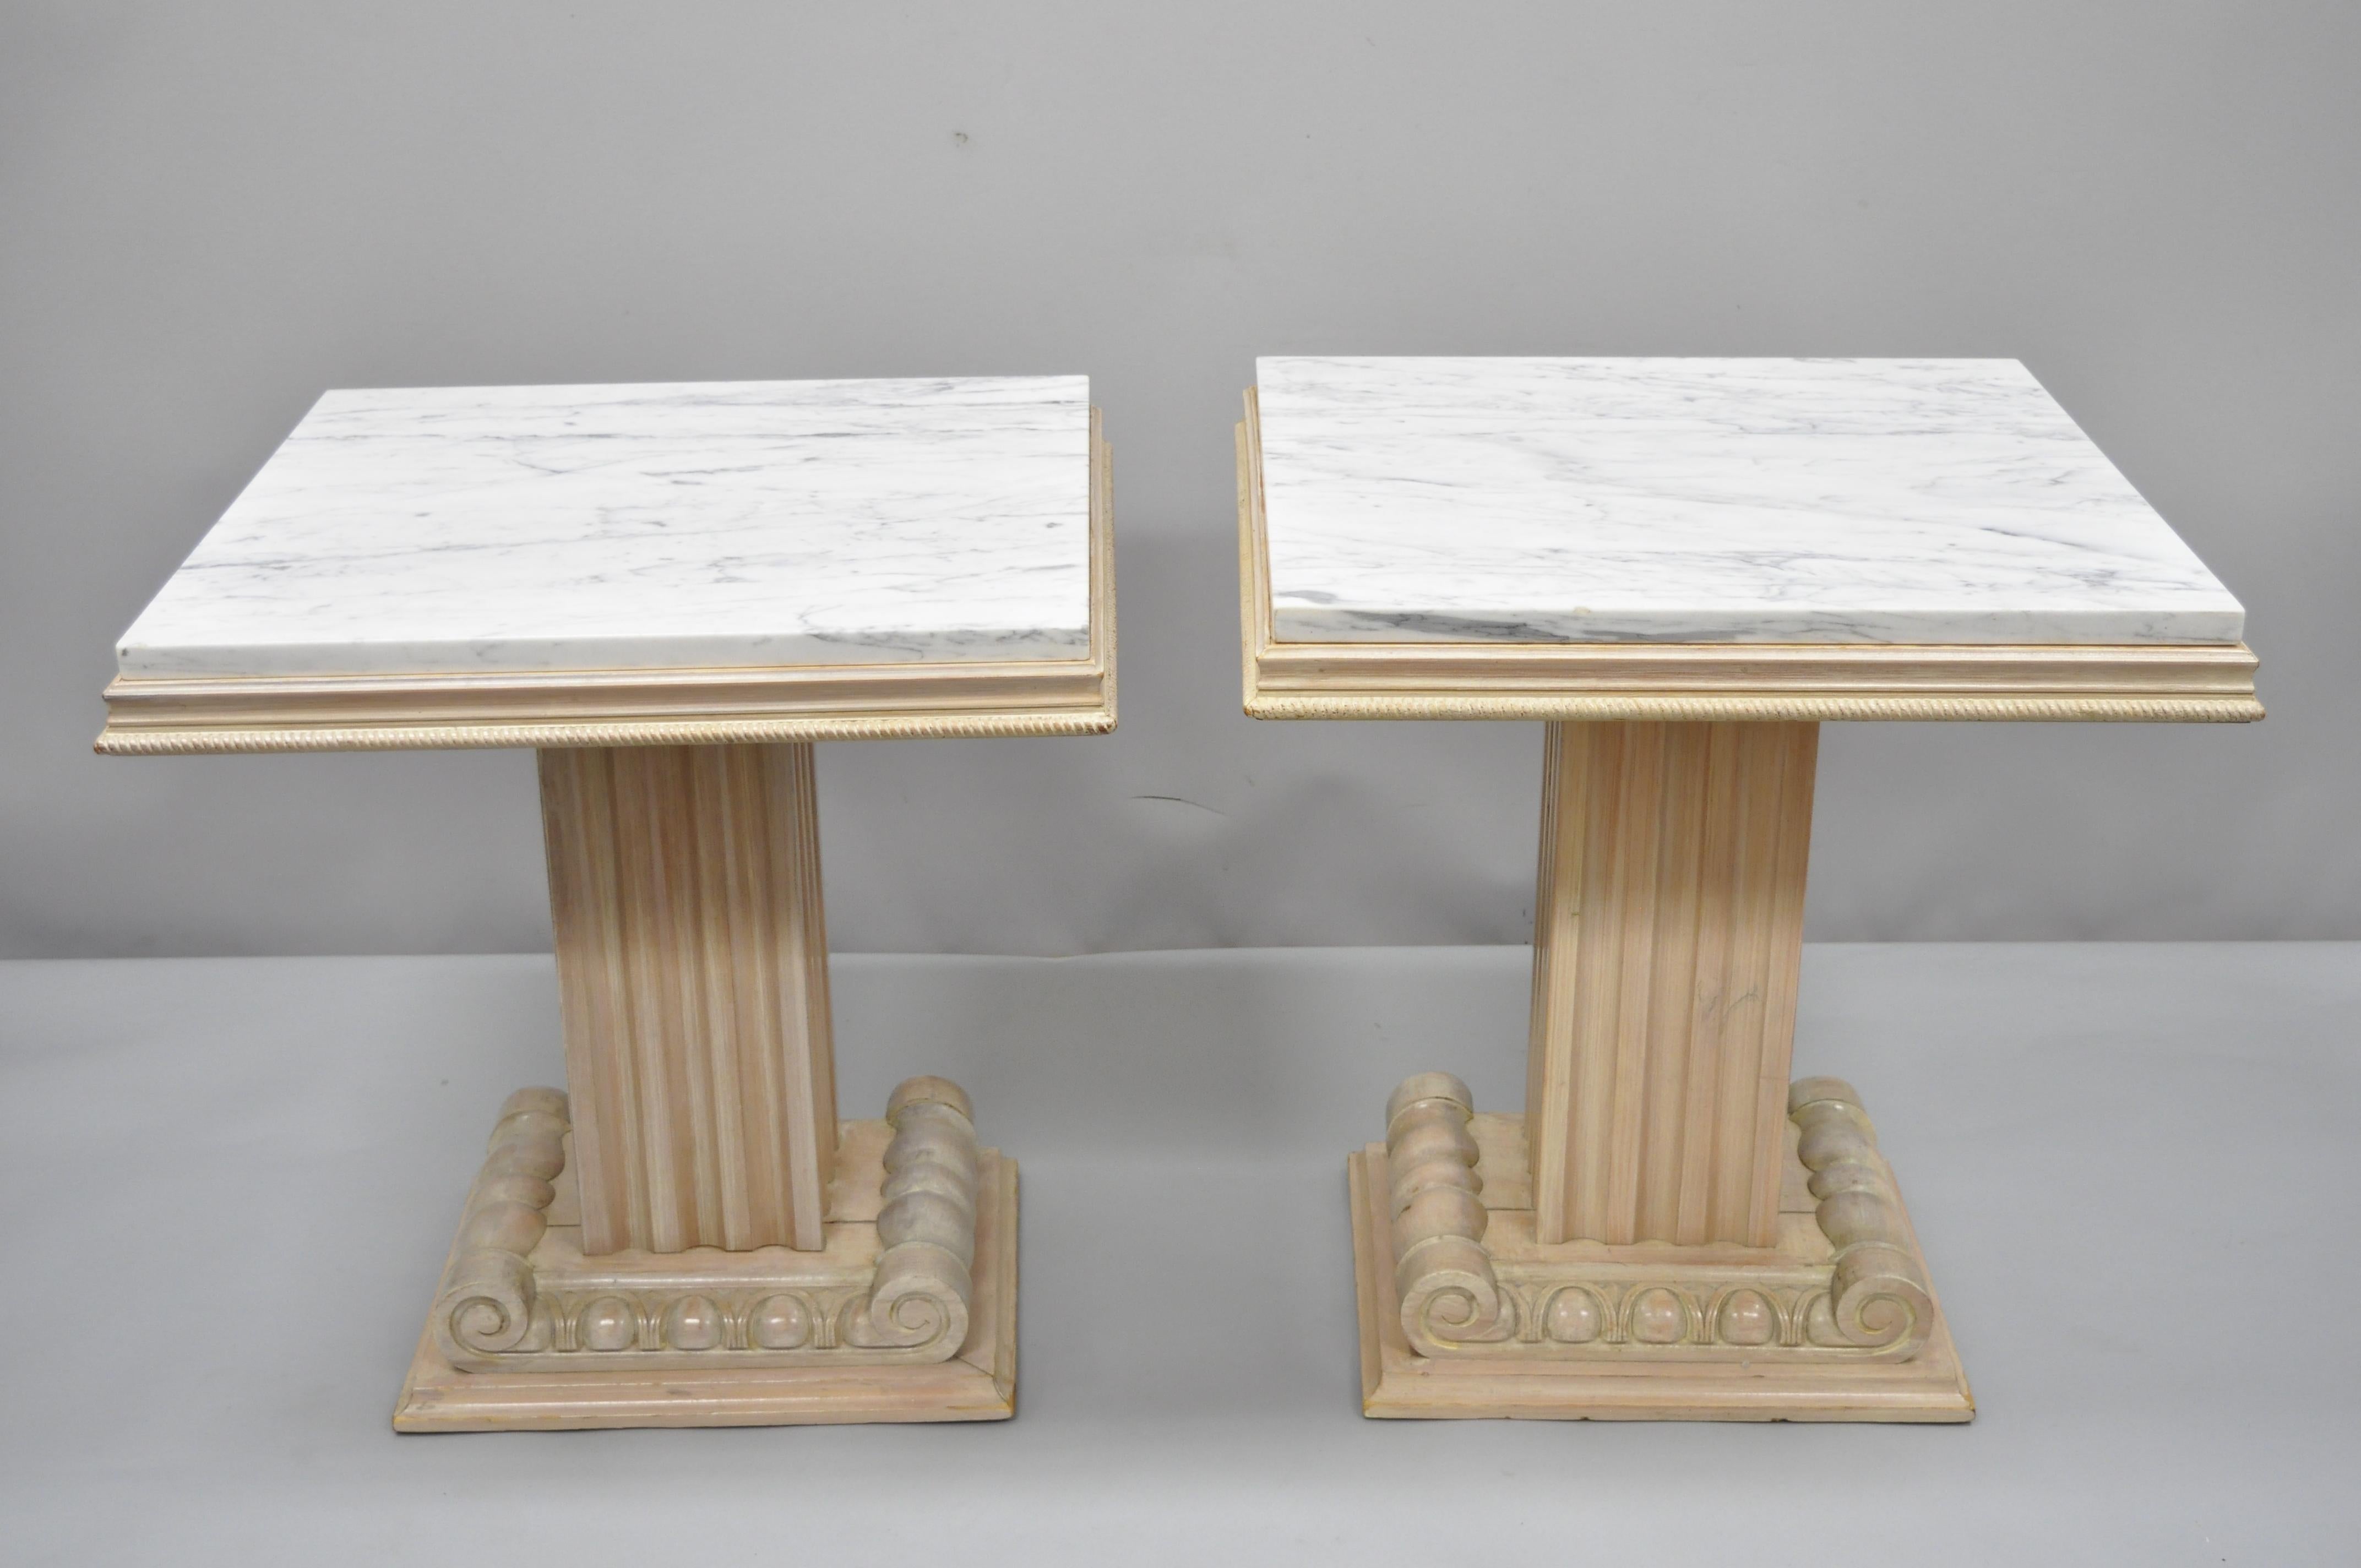 Pair of Grosfeld House Hollywood Regency ionic column pedestal base marble-top side tables. Item features solid carved wood bases, white marble tops, red leather tops underneath, cream washed distressed finish, nicely carved details, original label,